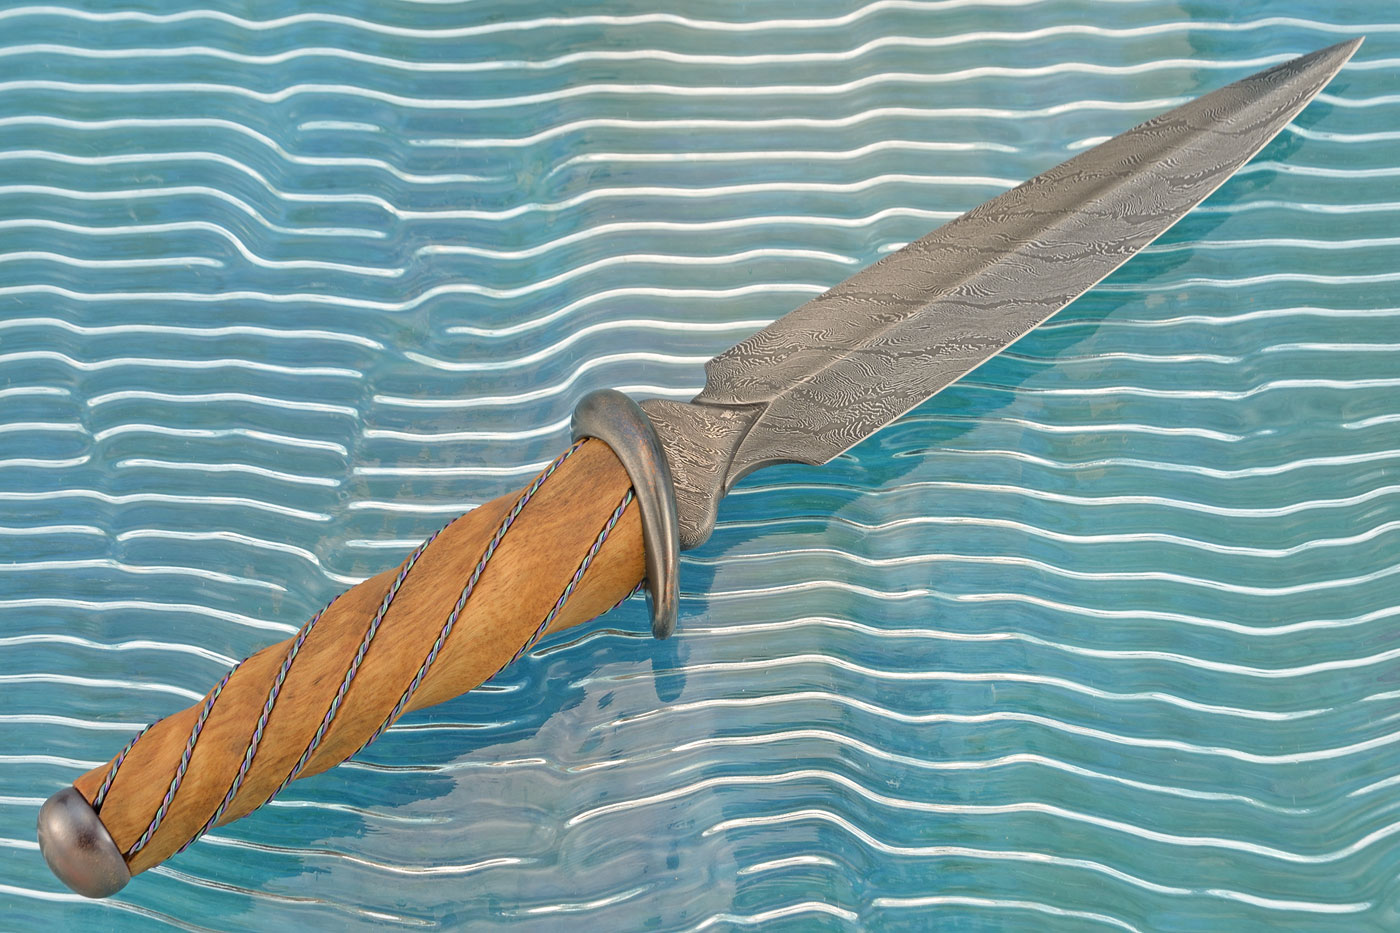 Damascus Dagger with Fluted Persimmon